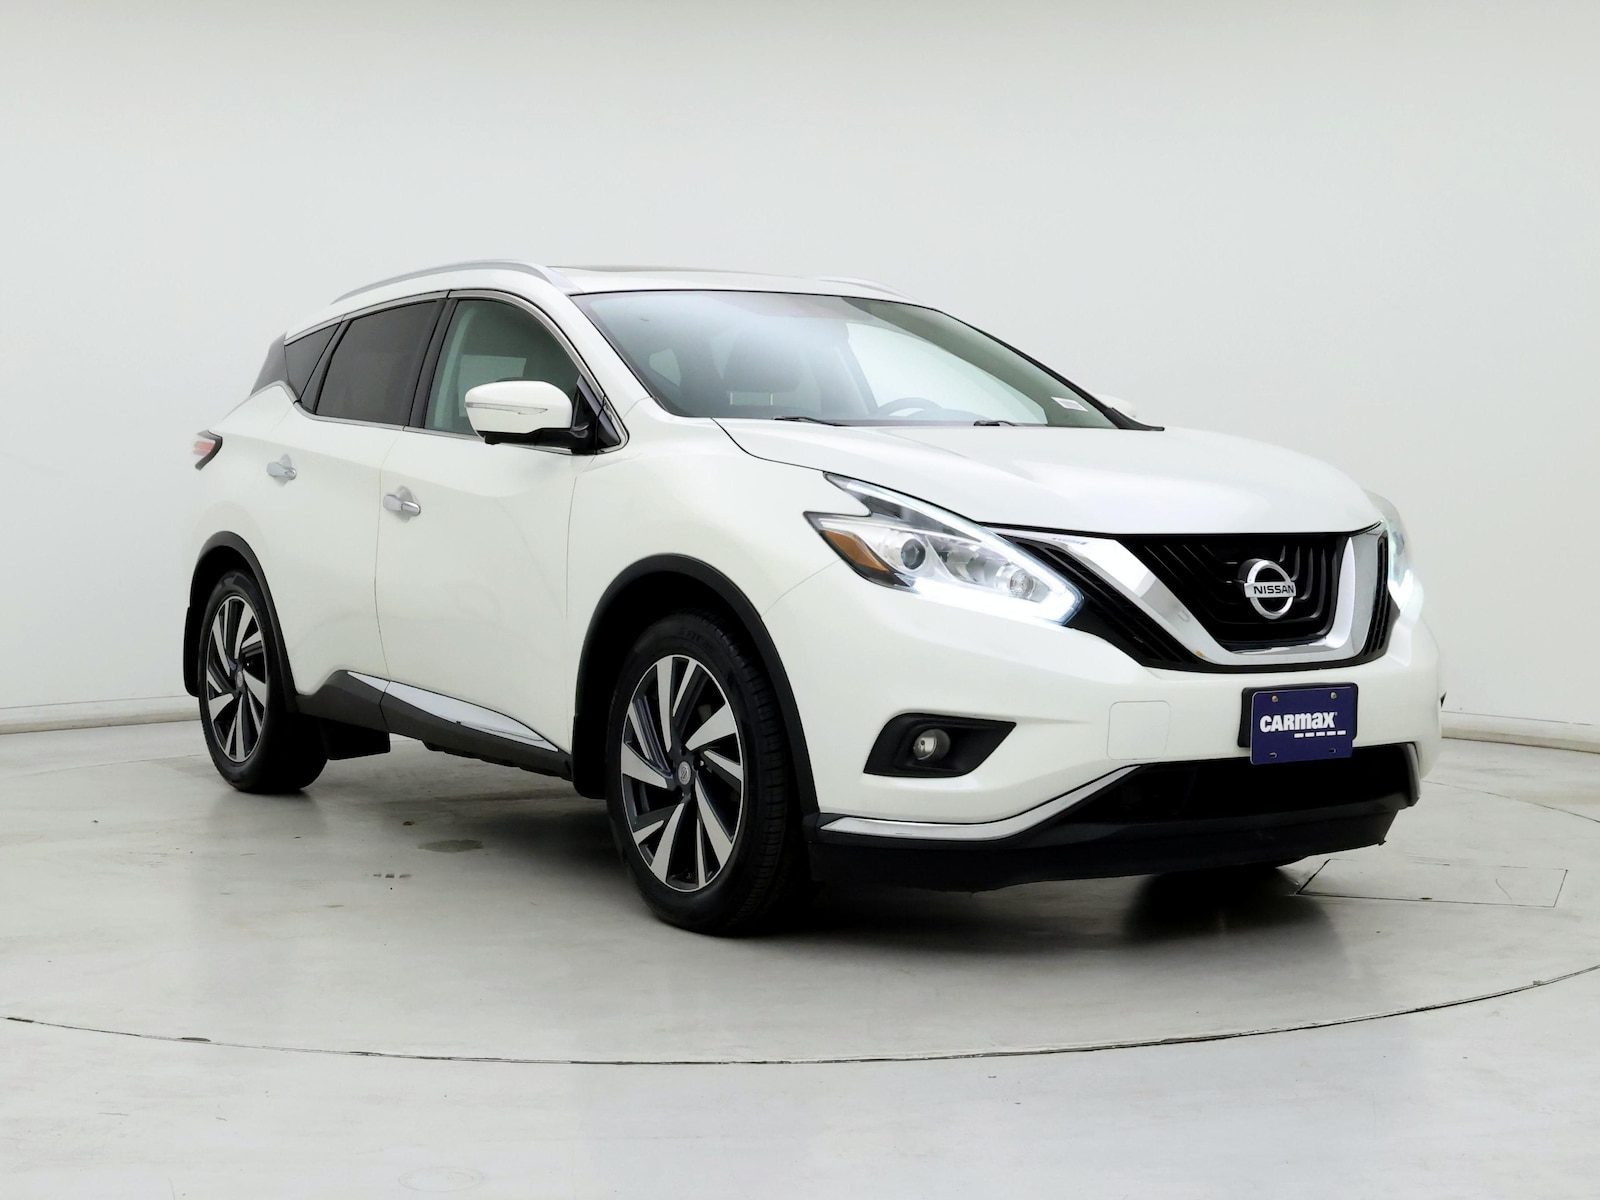 Used 2015 Nissan Murano Platinum with VIN 5N1AZ2MHXFN244543 for sale in Spokane Valley, WA